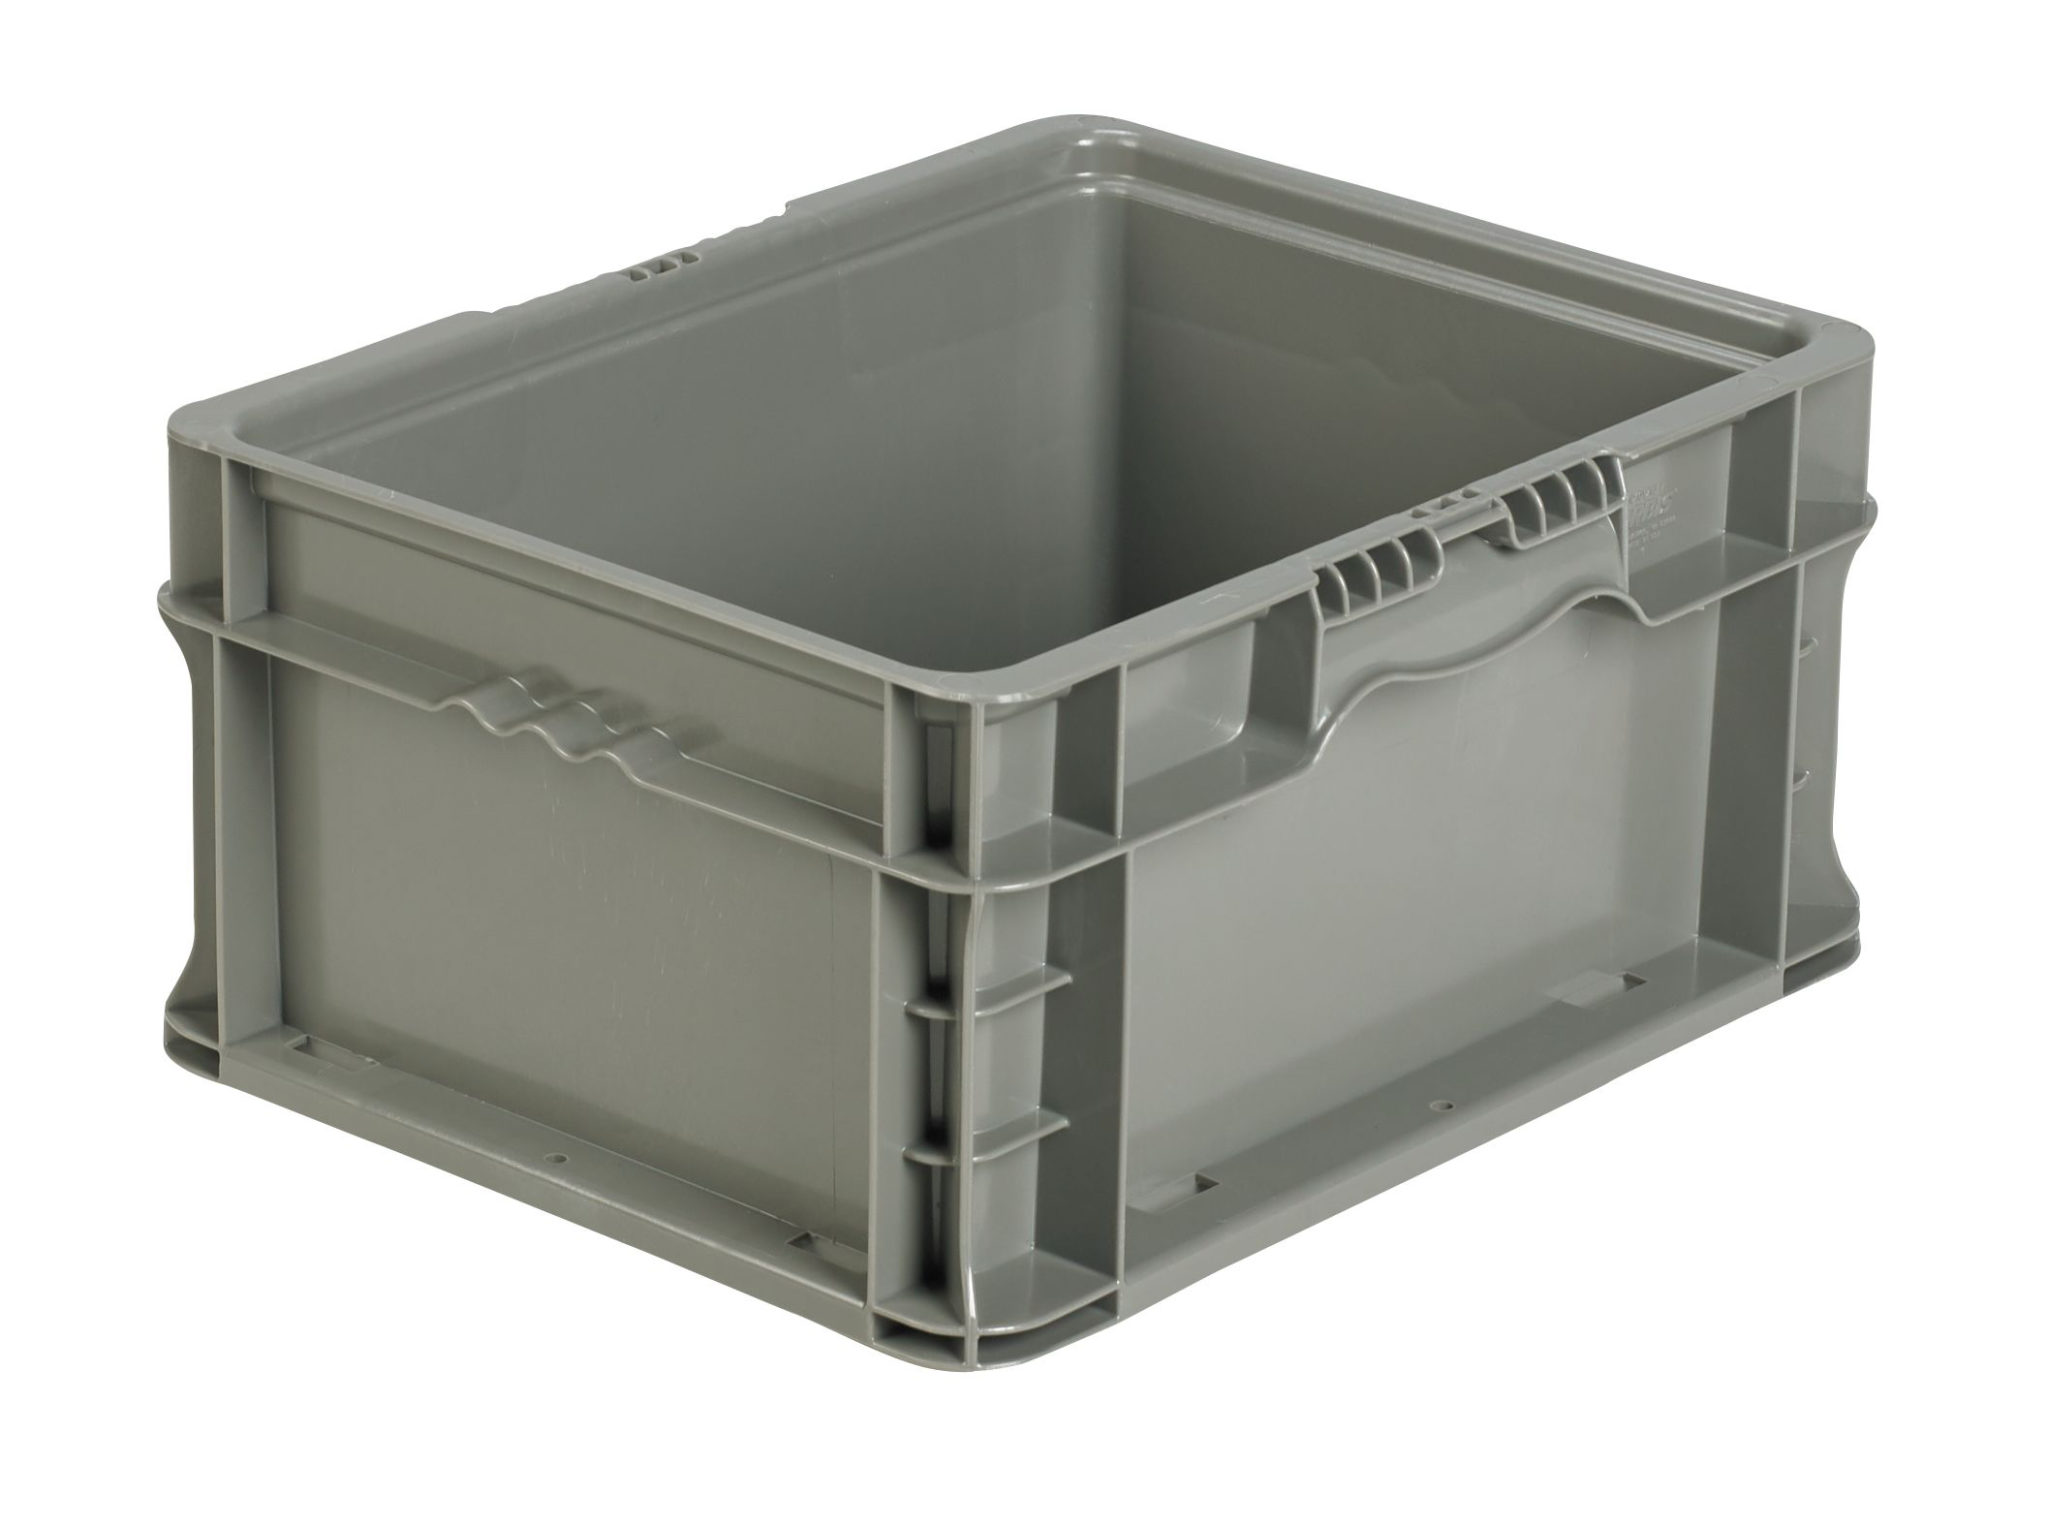 16 x 15 x 10 – Straight Wall Handheld Container